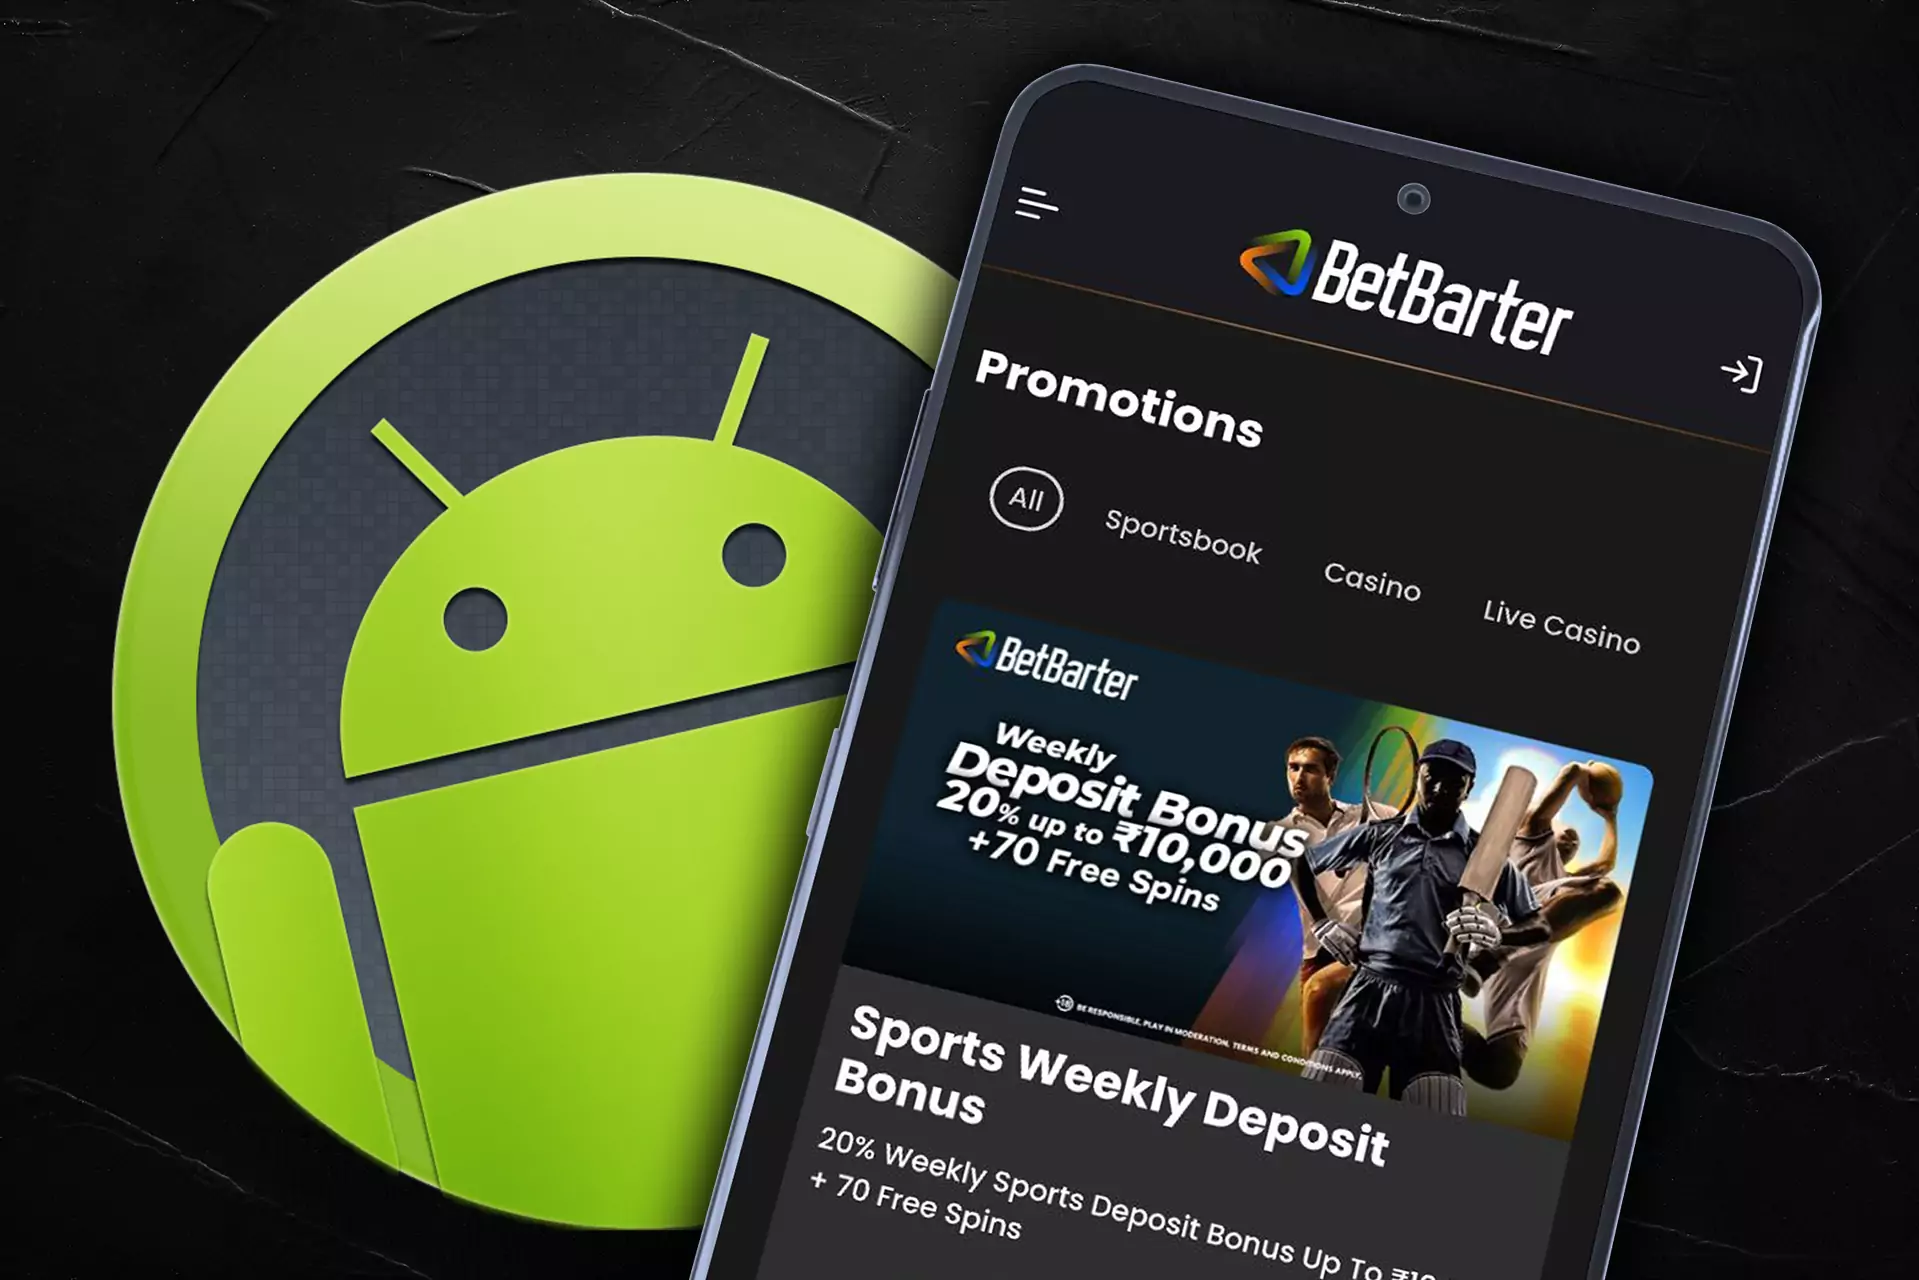 Download the BetBarter app for Android.